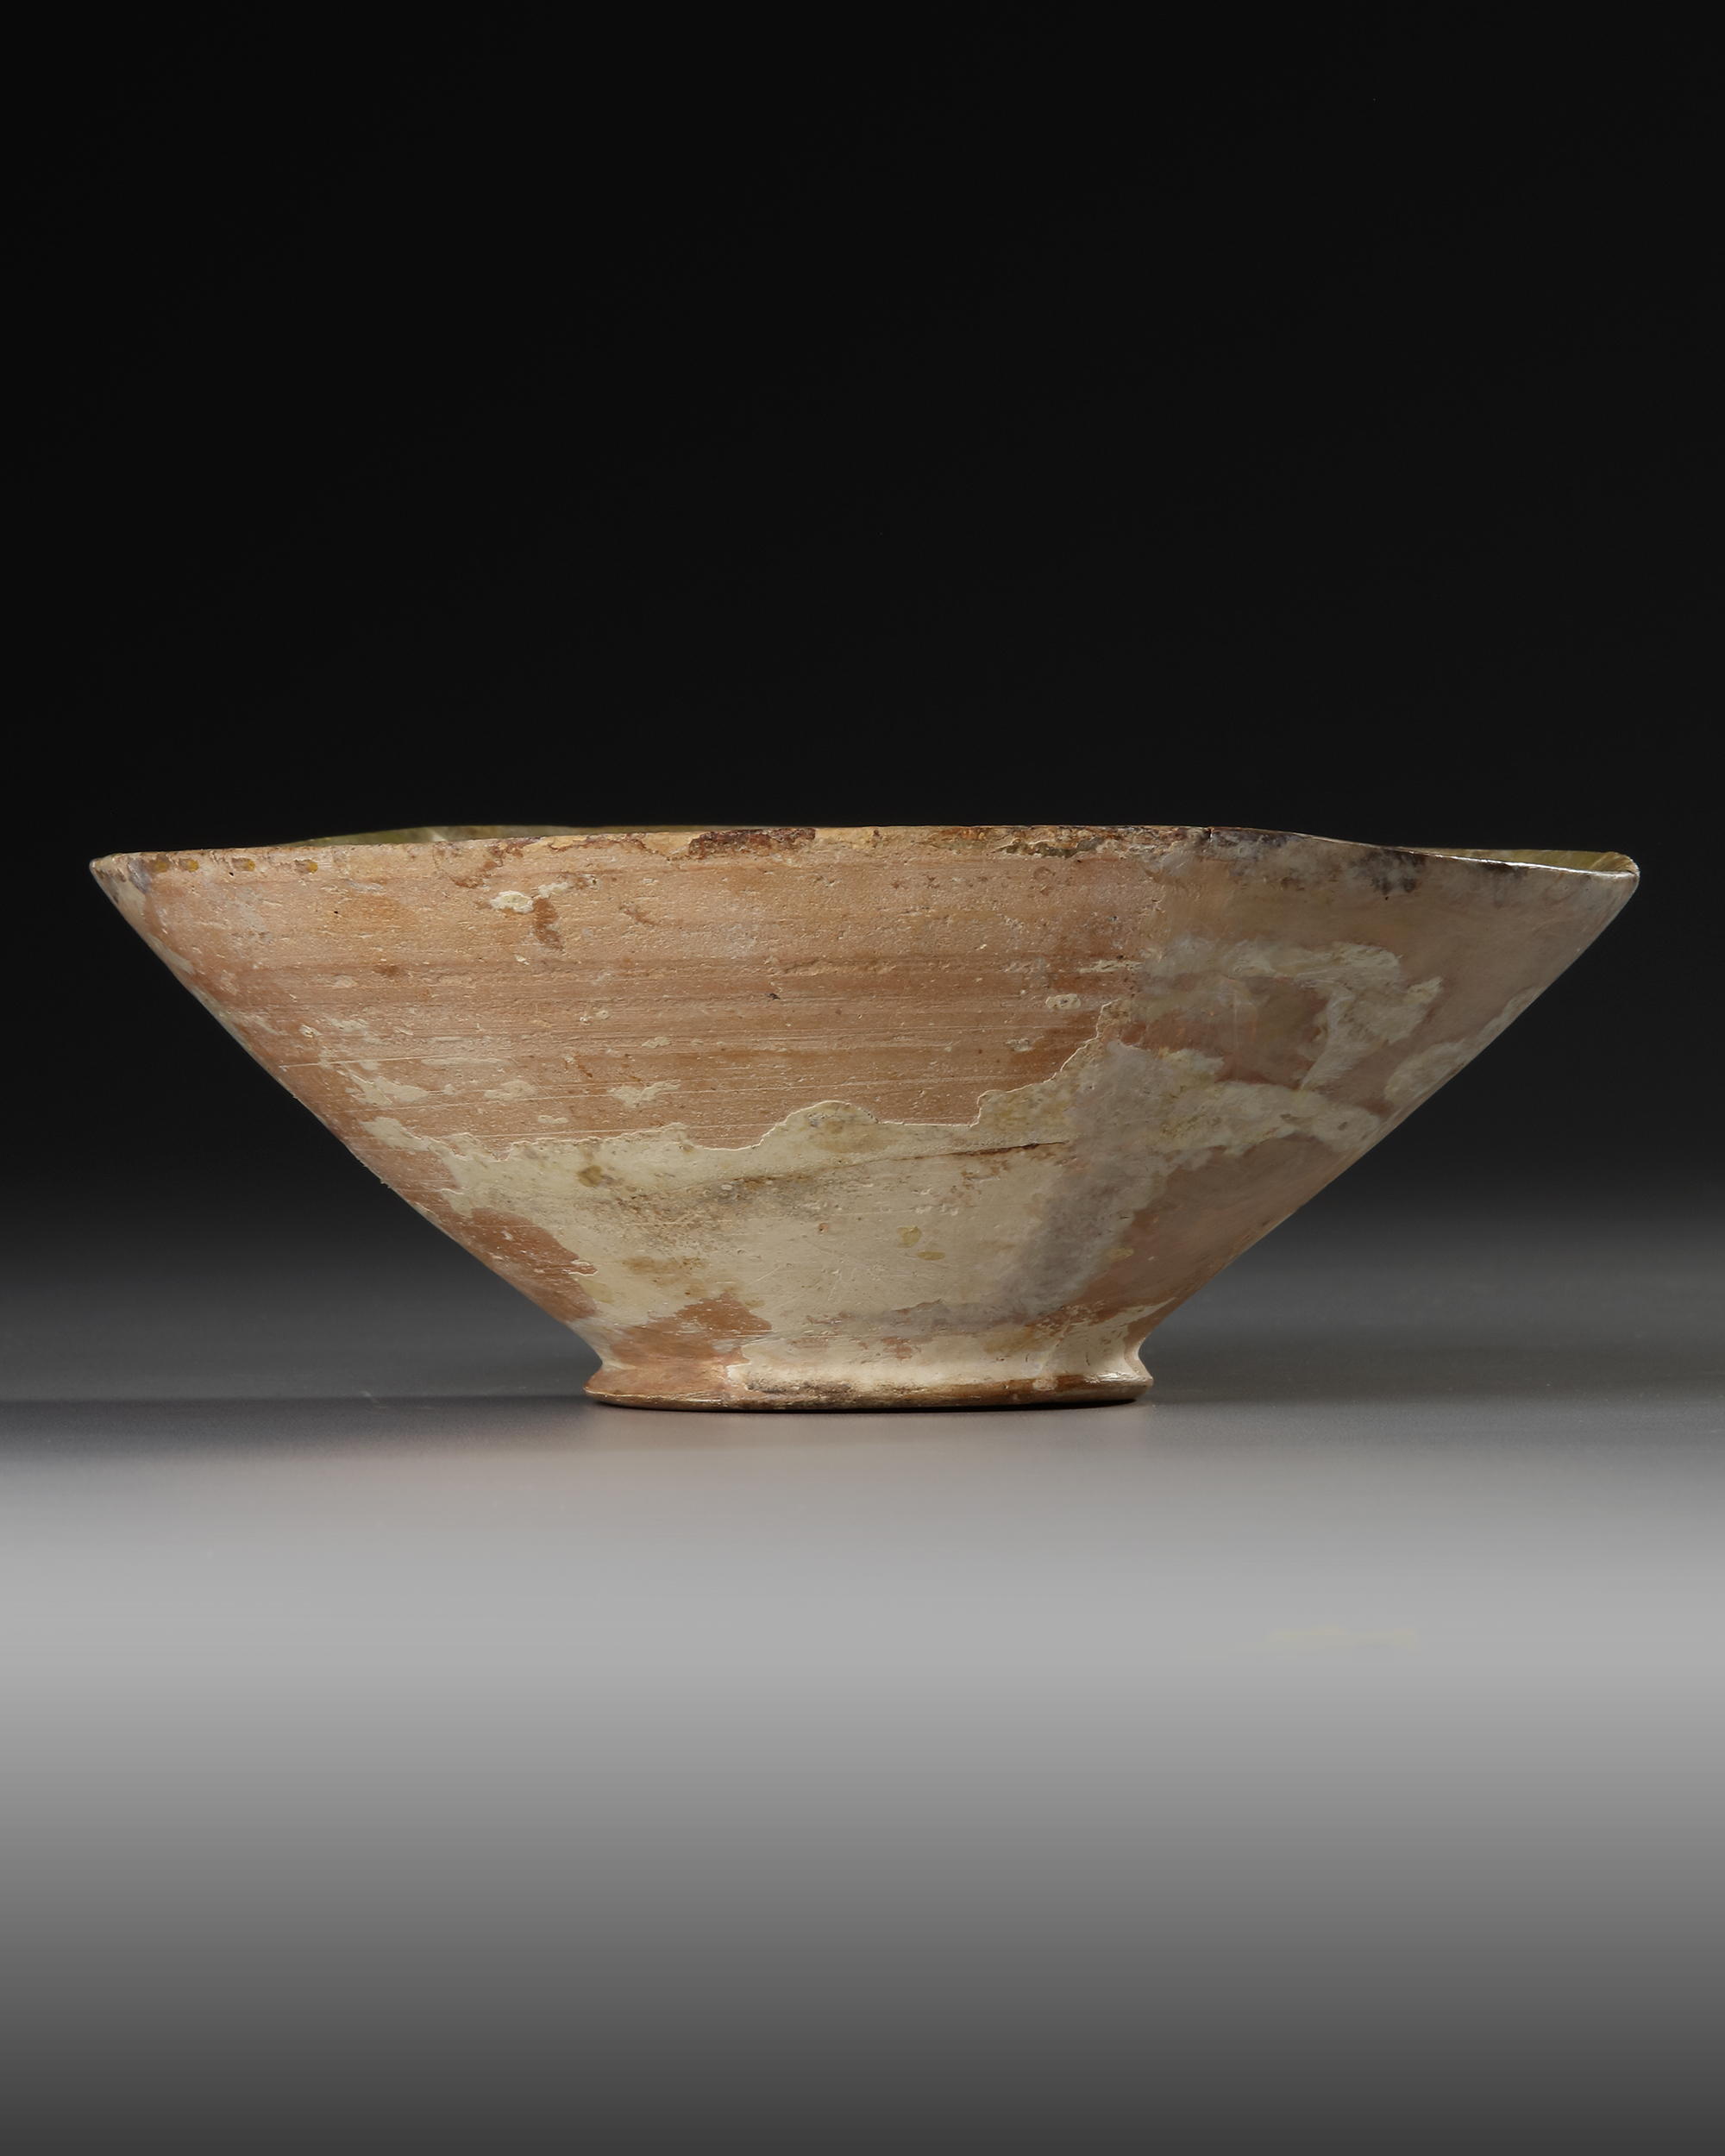 A NISHAPUR POTTERY BOWL, PERSIA, 10TH CENTURY - Image 8 of 10